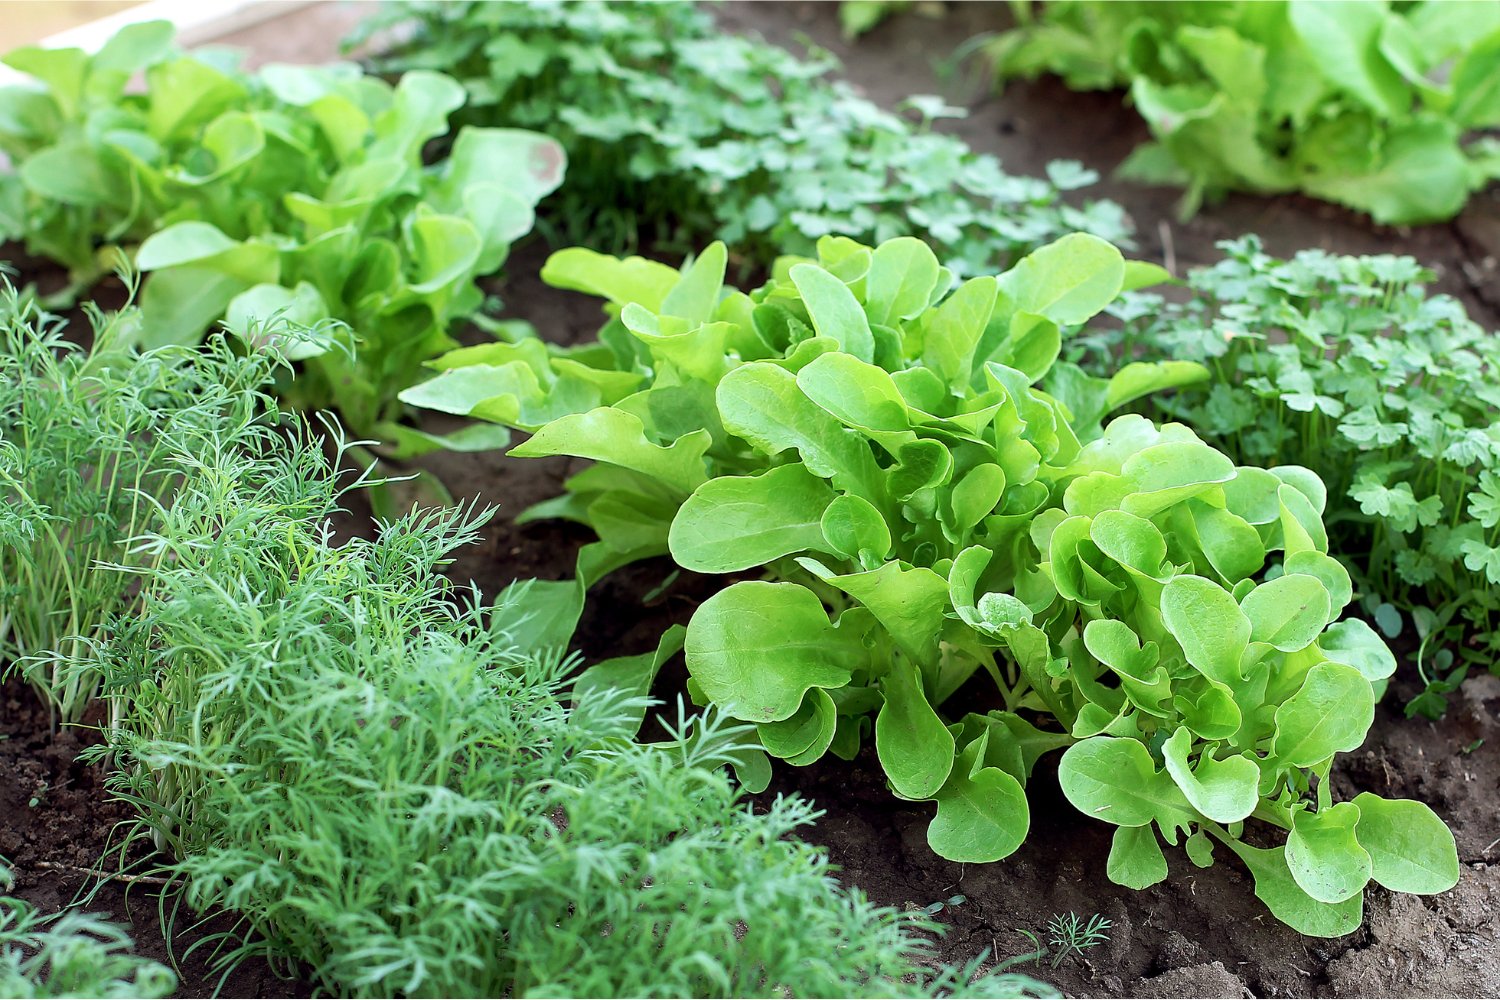 6 Important Questions About Preparation for Growing Vegetables